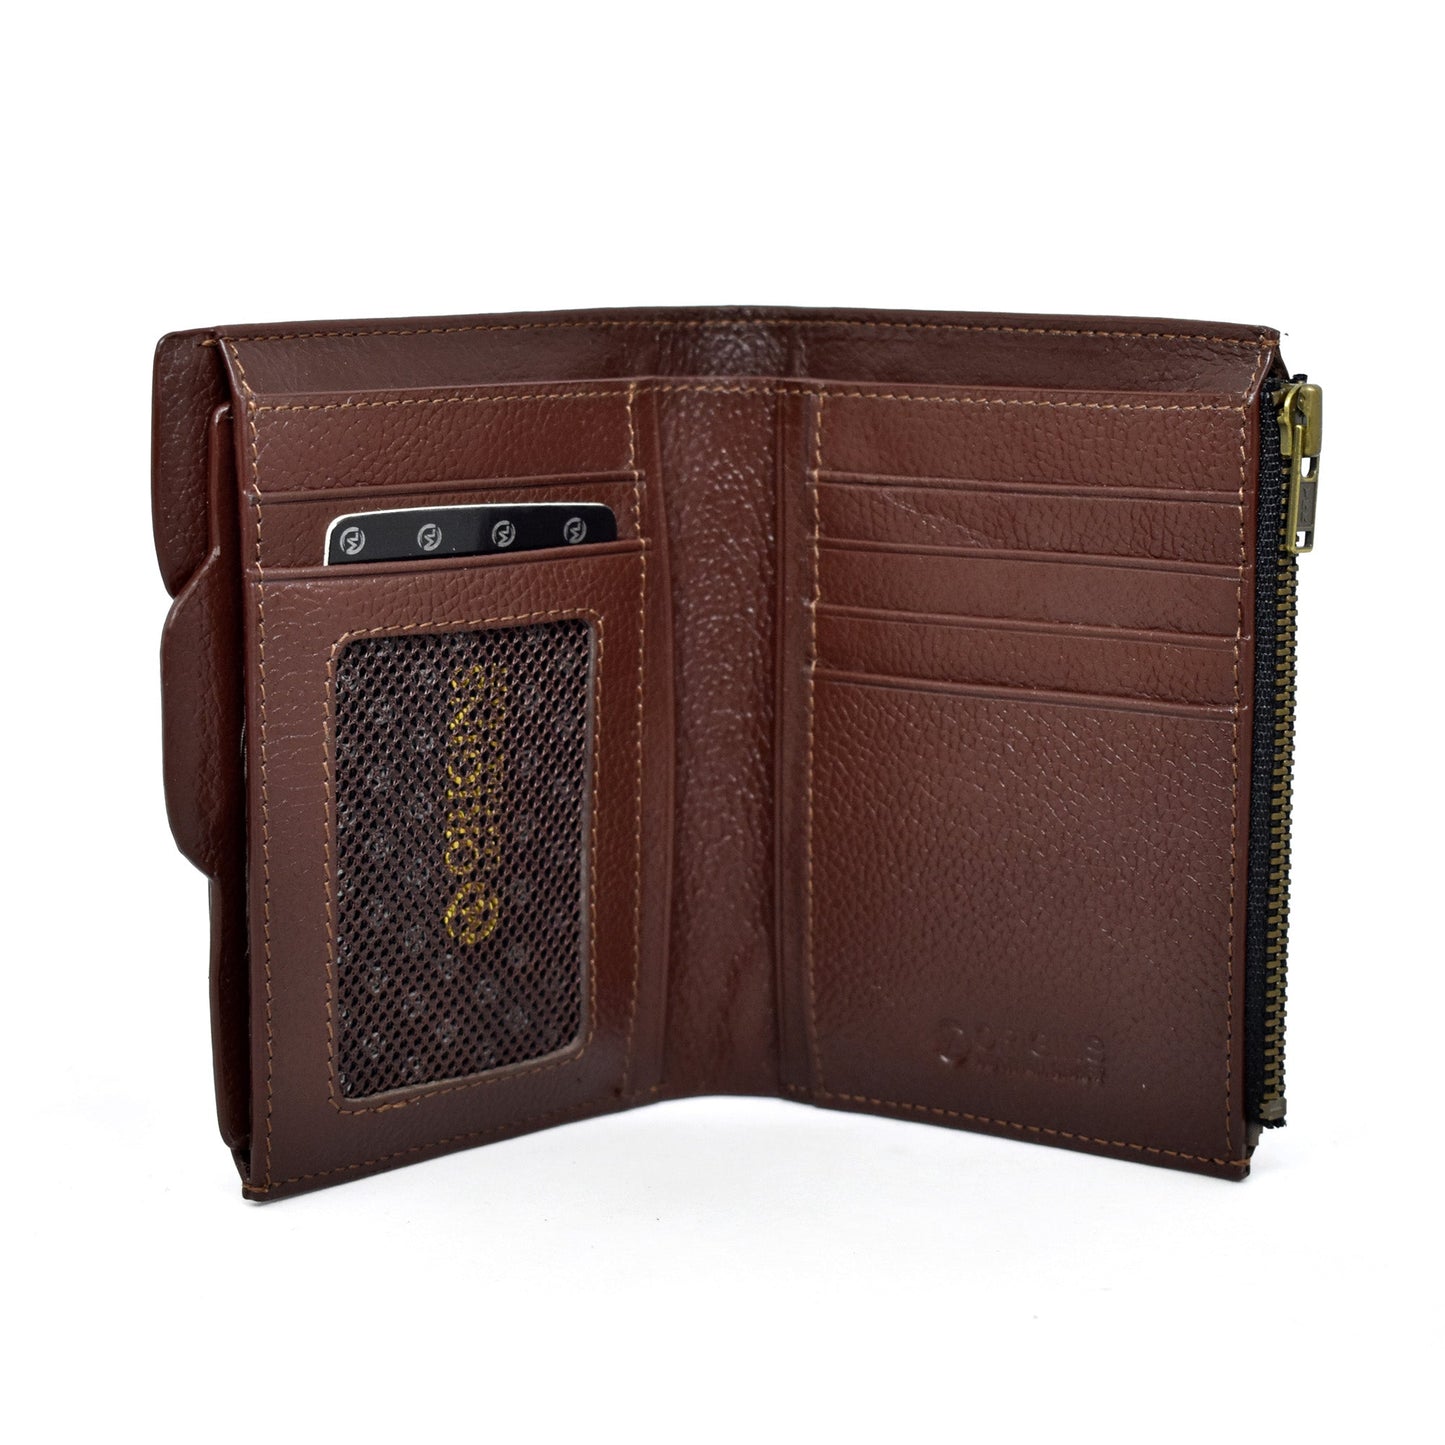 Bogesi Style Pocket Size Premium Quality Leather Wallet ORGN Wallet 29